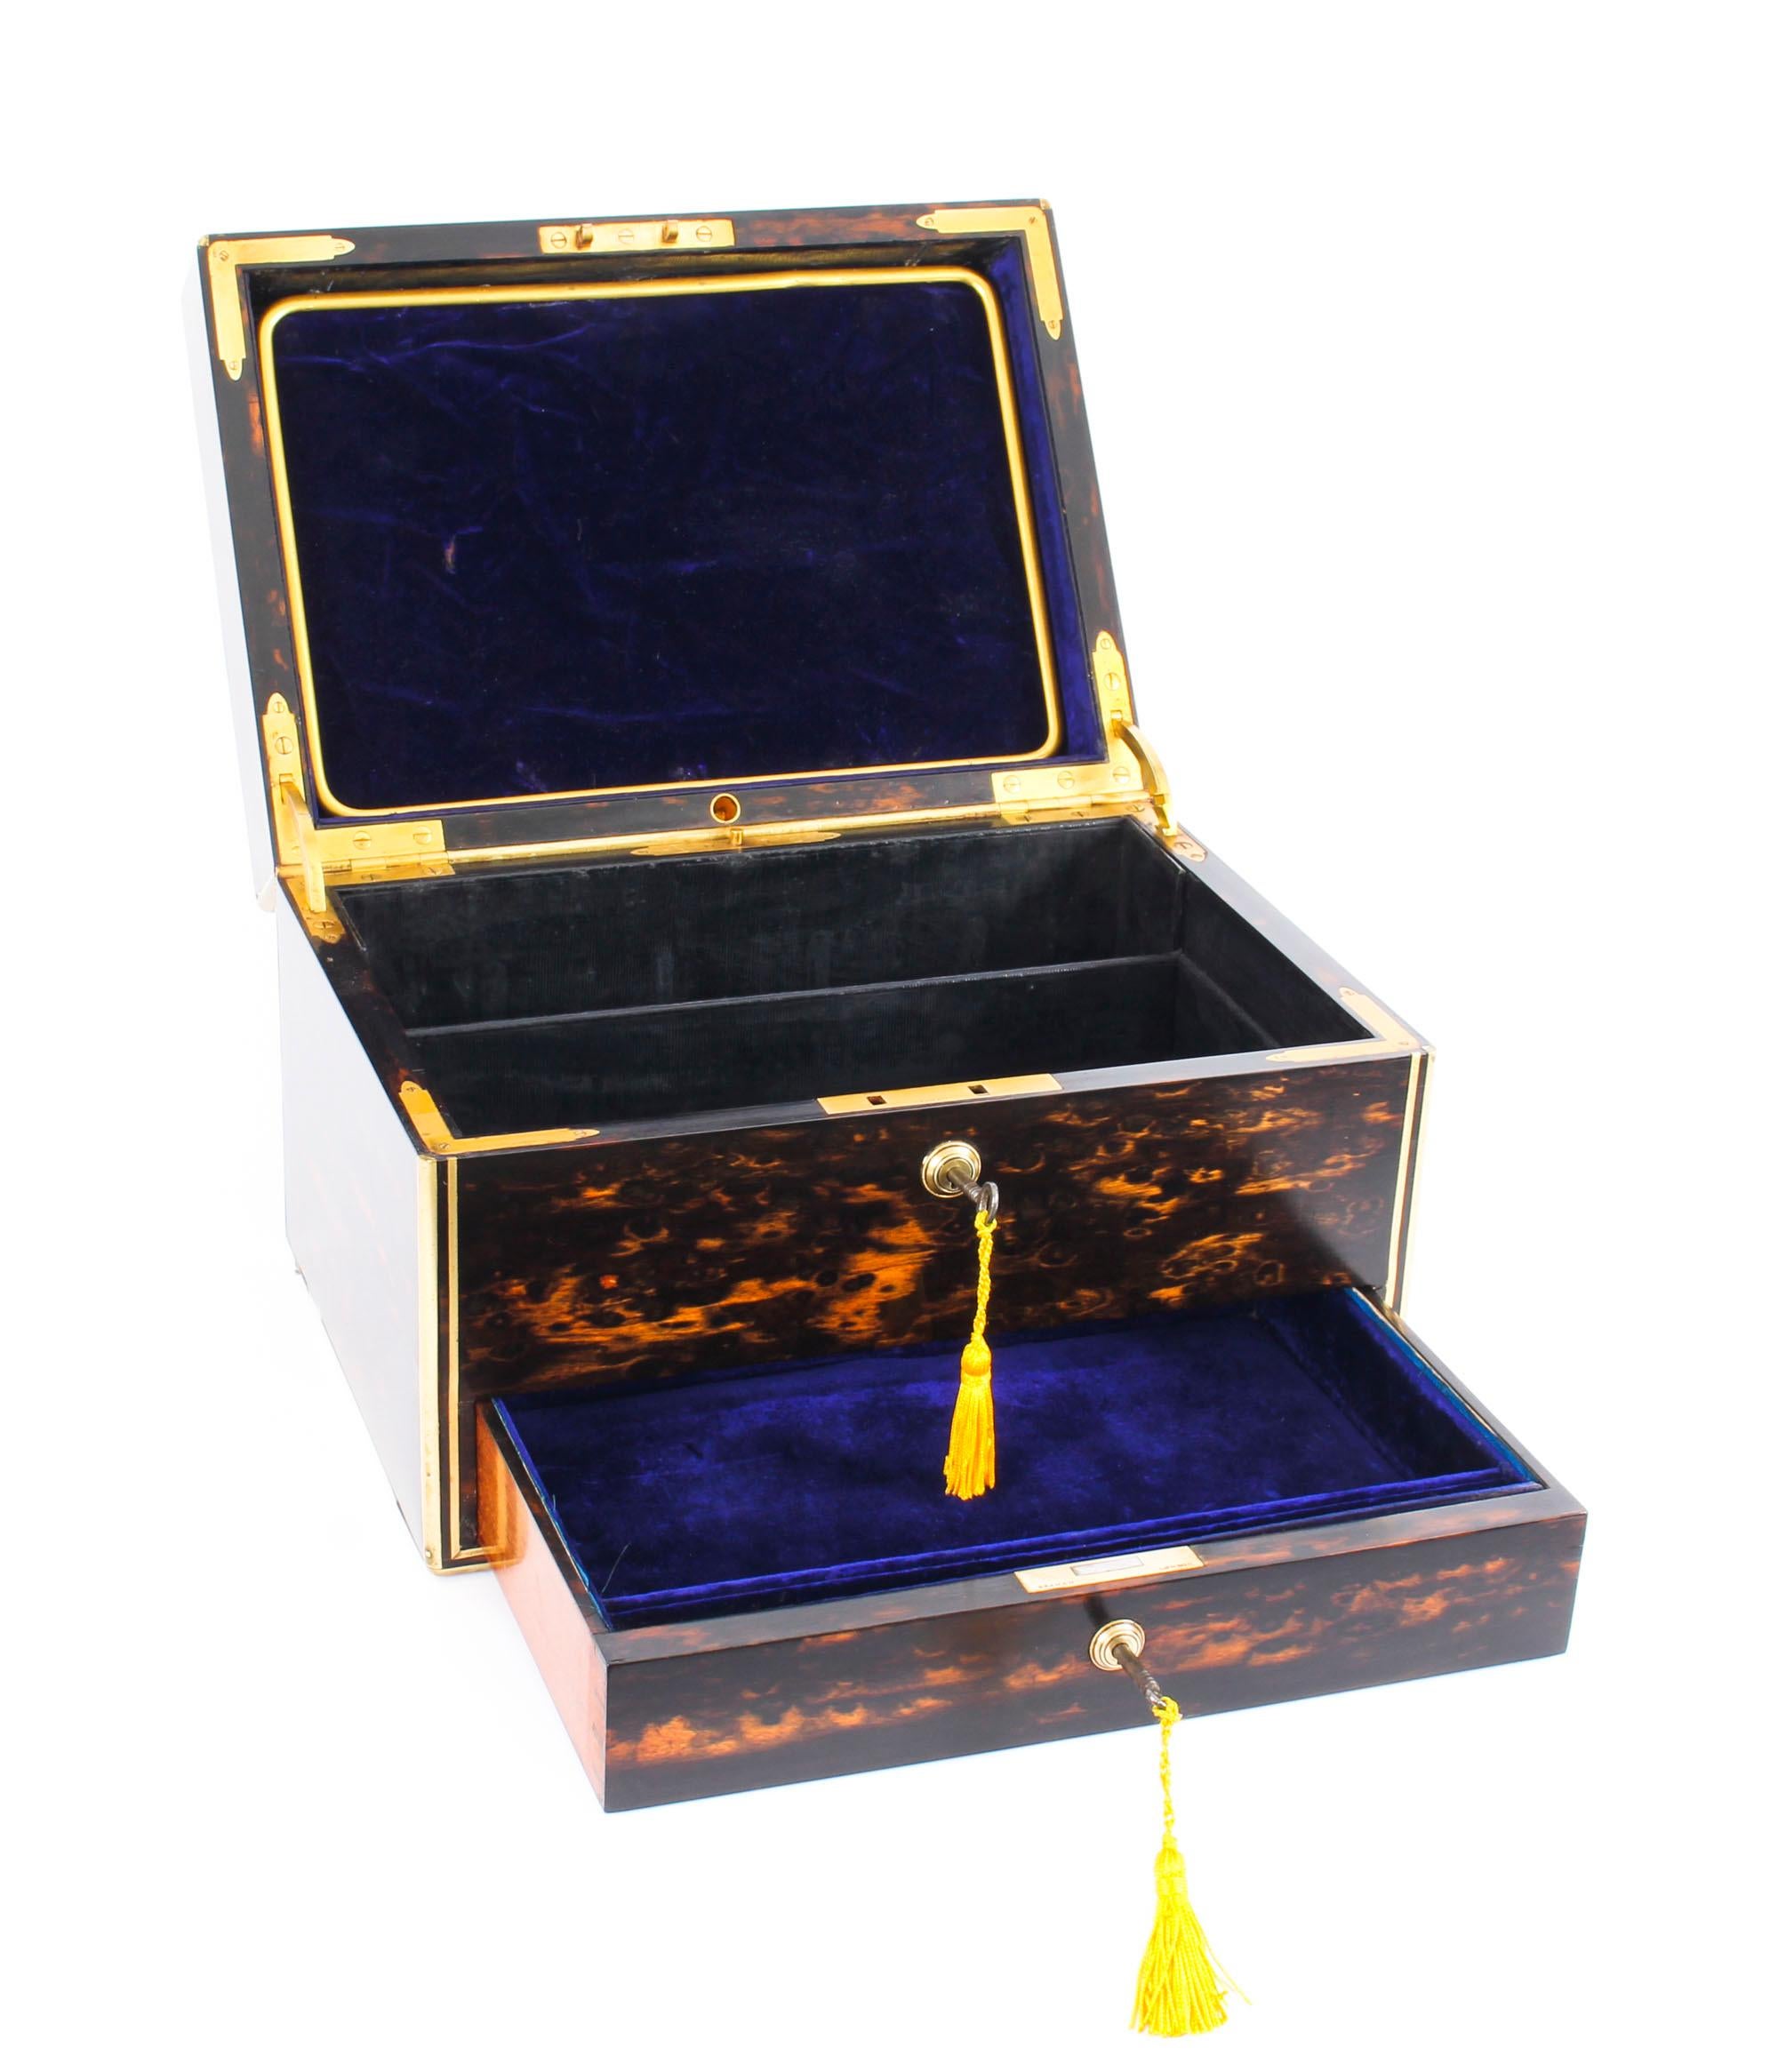 This is an exceptional high-quality antique English Victorian coromandel and brass banded jewellery box and dressing casket by the renowned manufacturers of boxes and caskets, Jenner & Knewstub of London, and dated March 1873. 

This splendid